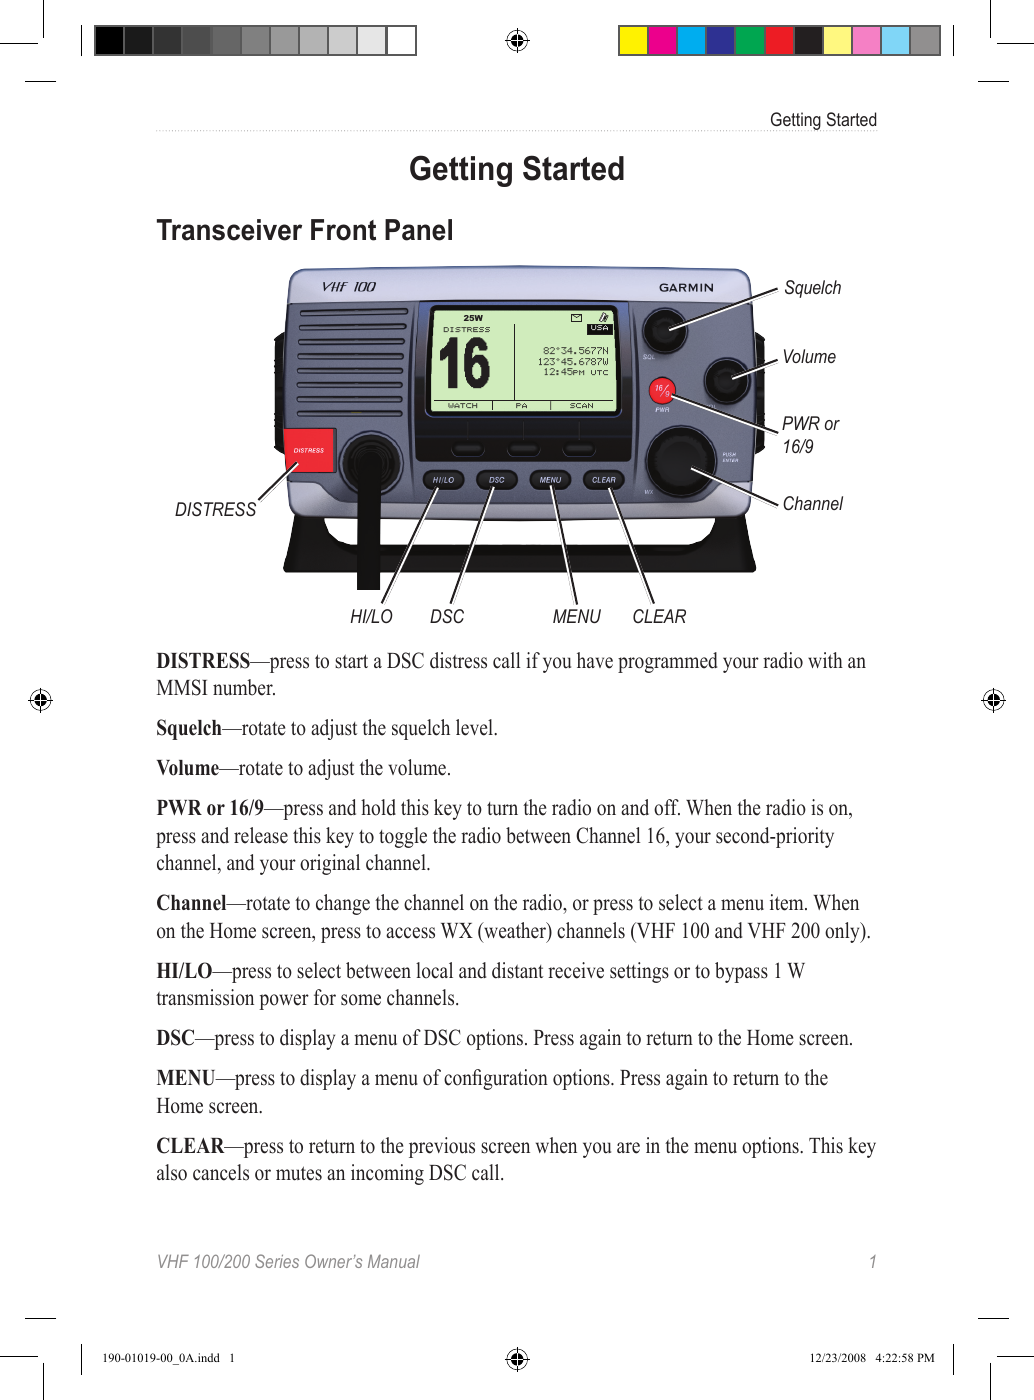 VHF 100/200 Series Owner’s Manual  1Getting StartedGetting StartedTransceiver Front PanelUSA16 DISTRESSWATCH  PA SCAN“‰°Š‹.Œ‘’’ƒˆ‰Š°‹Œ.‘’“’†ˆ‰:‹ŒPM UTCW25DISTRESSHI/LO DSC MENU CLEARSquelchVolumePWR or 16/9ChannelDISTRESS—press to start a DSC distress call if you have programmed your radio with an MMSI number.Squelch—rotate to adjust the squelch level.Volume—rotate to adjust the volume.PWR or 16/9—press and hold this key to turn the radio on and off. When the radio is on, press and release this key to toggle the radio between Channel 16, your second-priority channel, and your original channel.Channel—rotate to change the channel on the radio, or press to select a menu item. When on the Home screen, press to access WX (weather) channels (VHF 100 and VHF 200 only).HI/LO—press to select between local and distant receive settings or to bypass 1 W transmission power for some channels.DSC—press to display a menu of DSC options. Press again to return to the Home screen.MENU—press to display a menu of conguration options. Press again to return to the Home screen.CLEAR—press to return to the previous screen when you are in the menu options. This key also cancels or mutes an incoming DSC call.190-01019-00_0A.indd   1 12/23/2008   4:22:58 PM